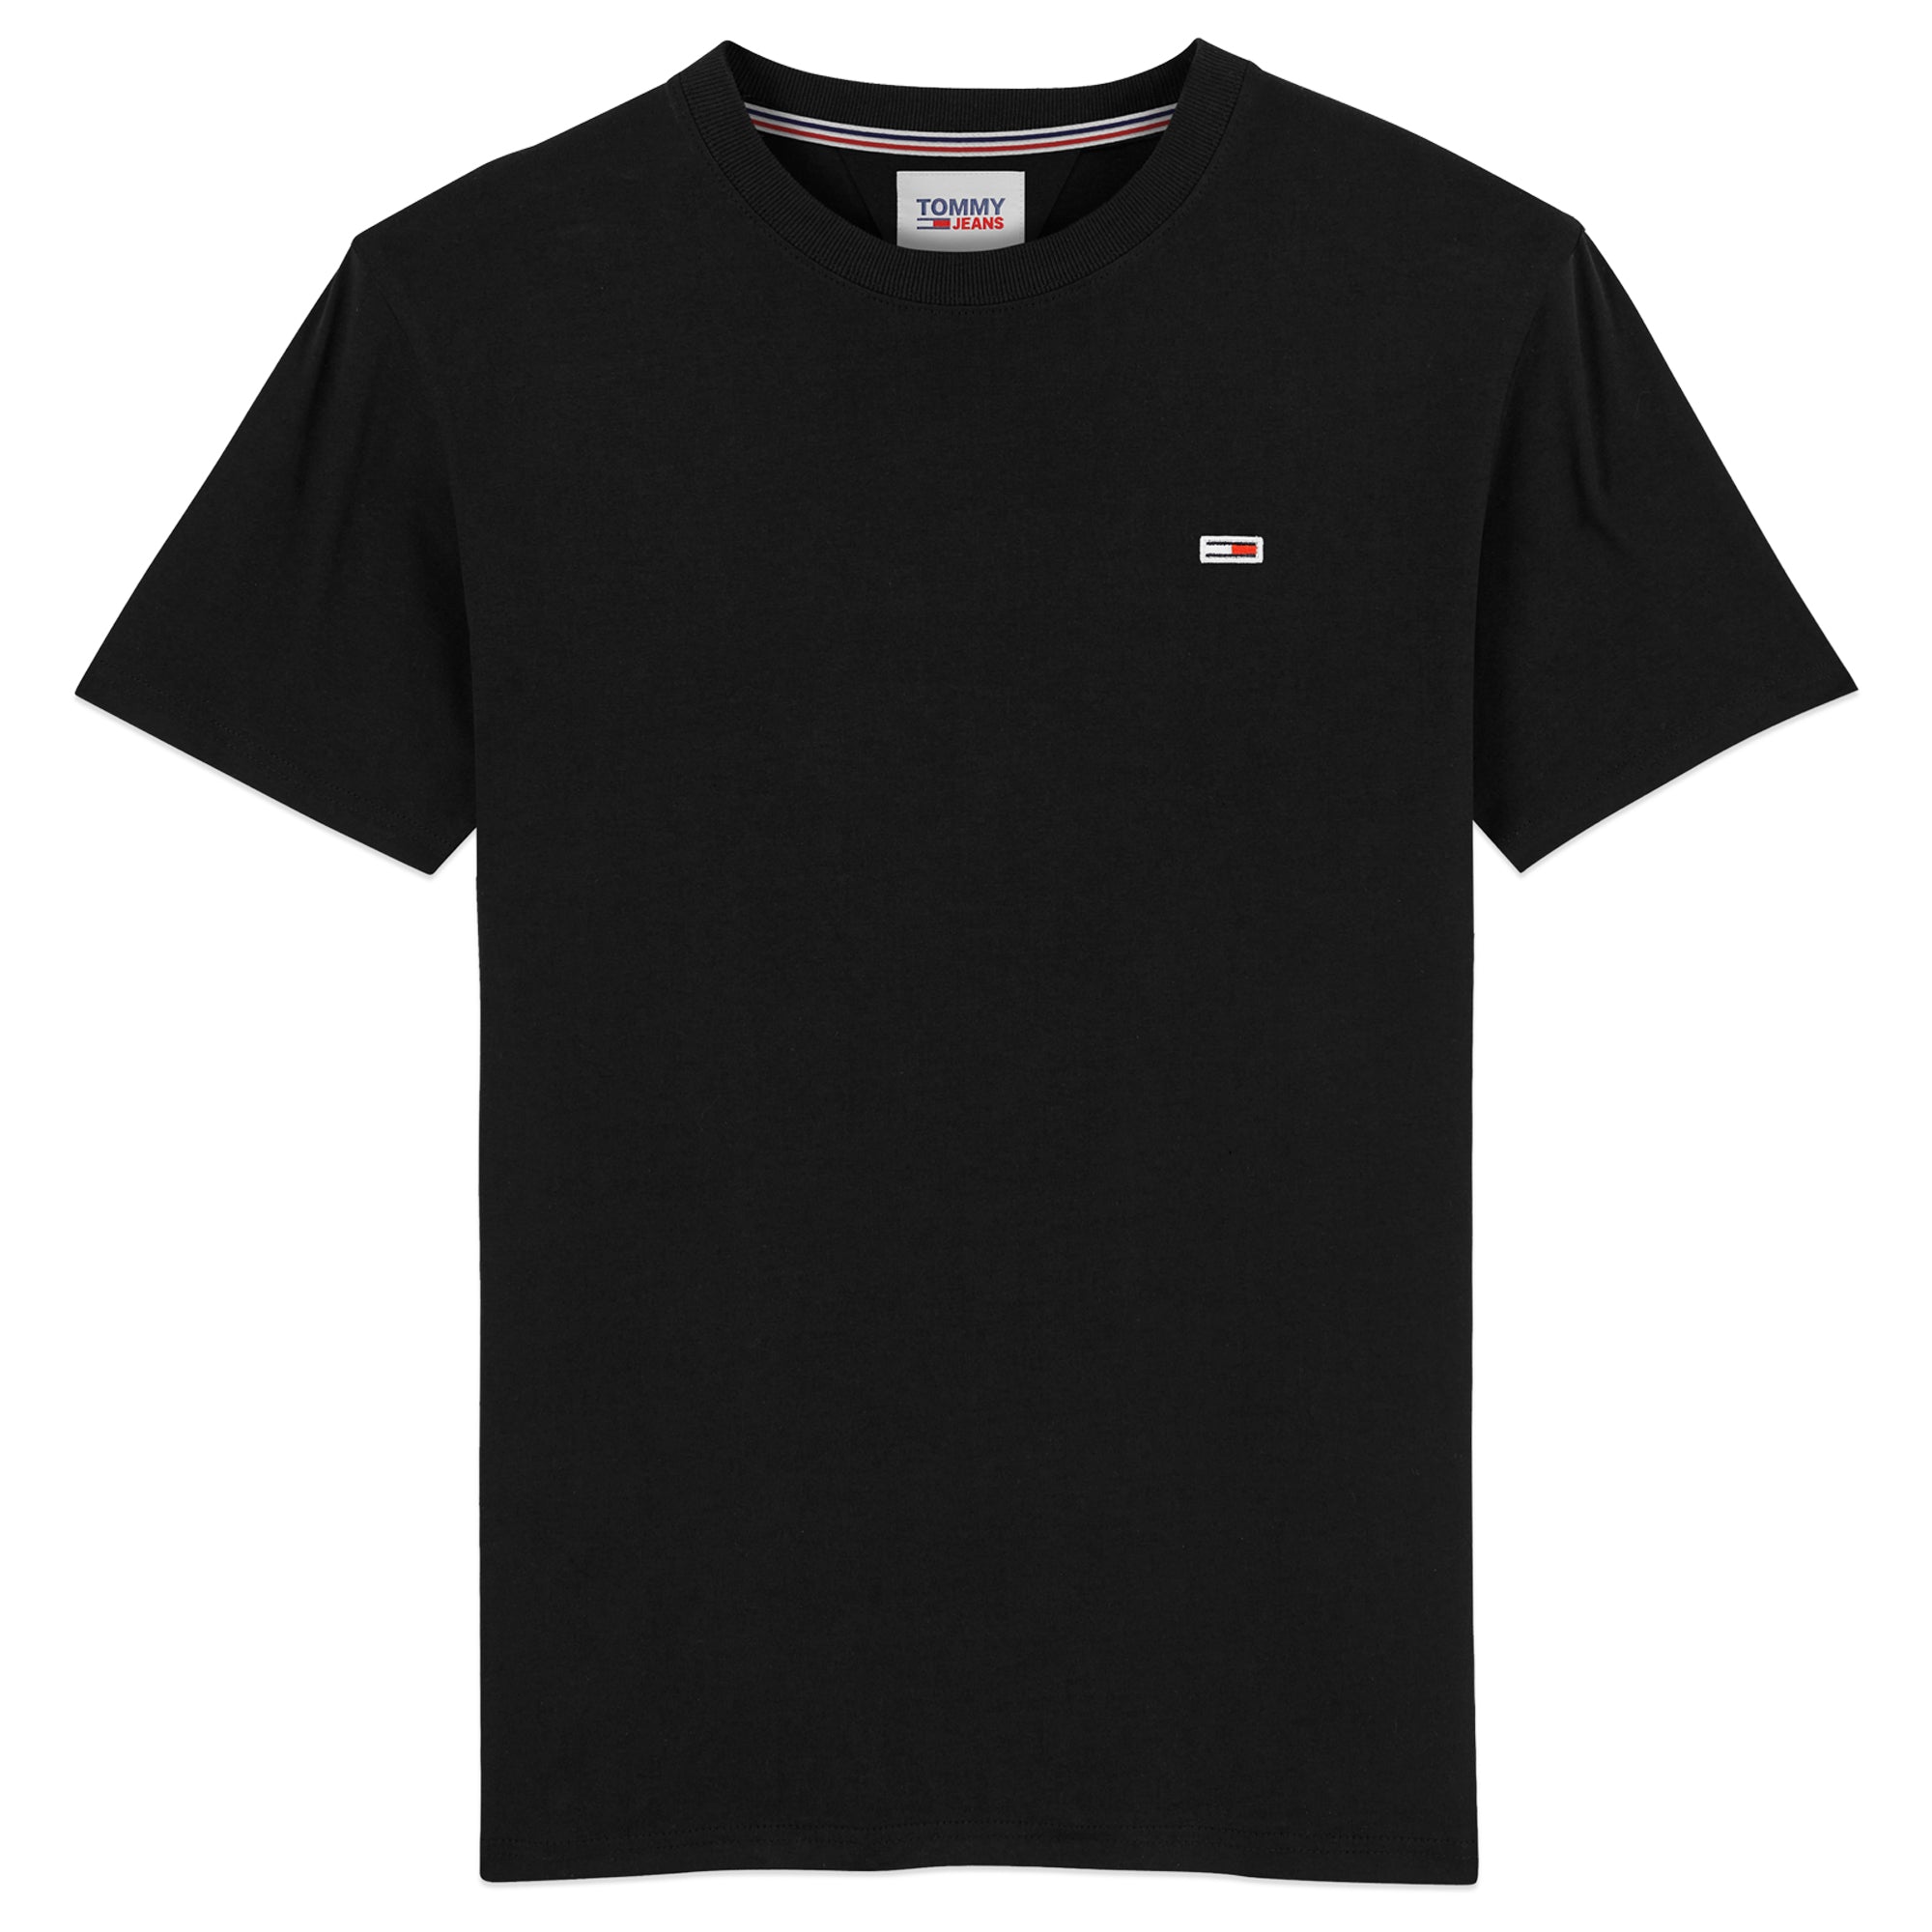 Tommy Jeans New Flag T-Shirt - Black